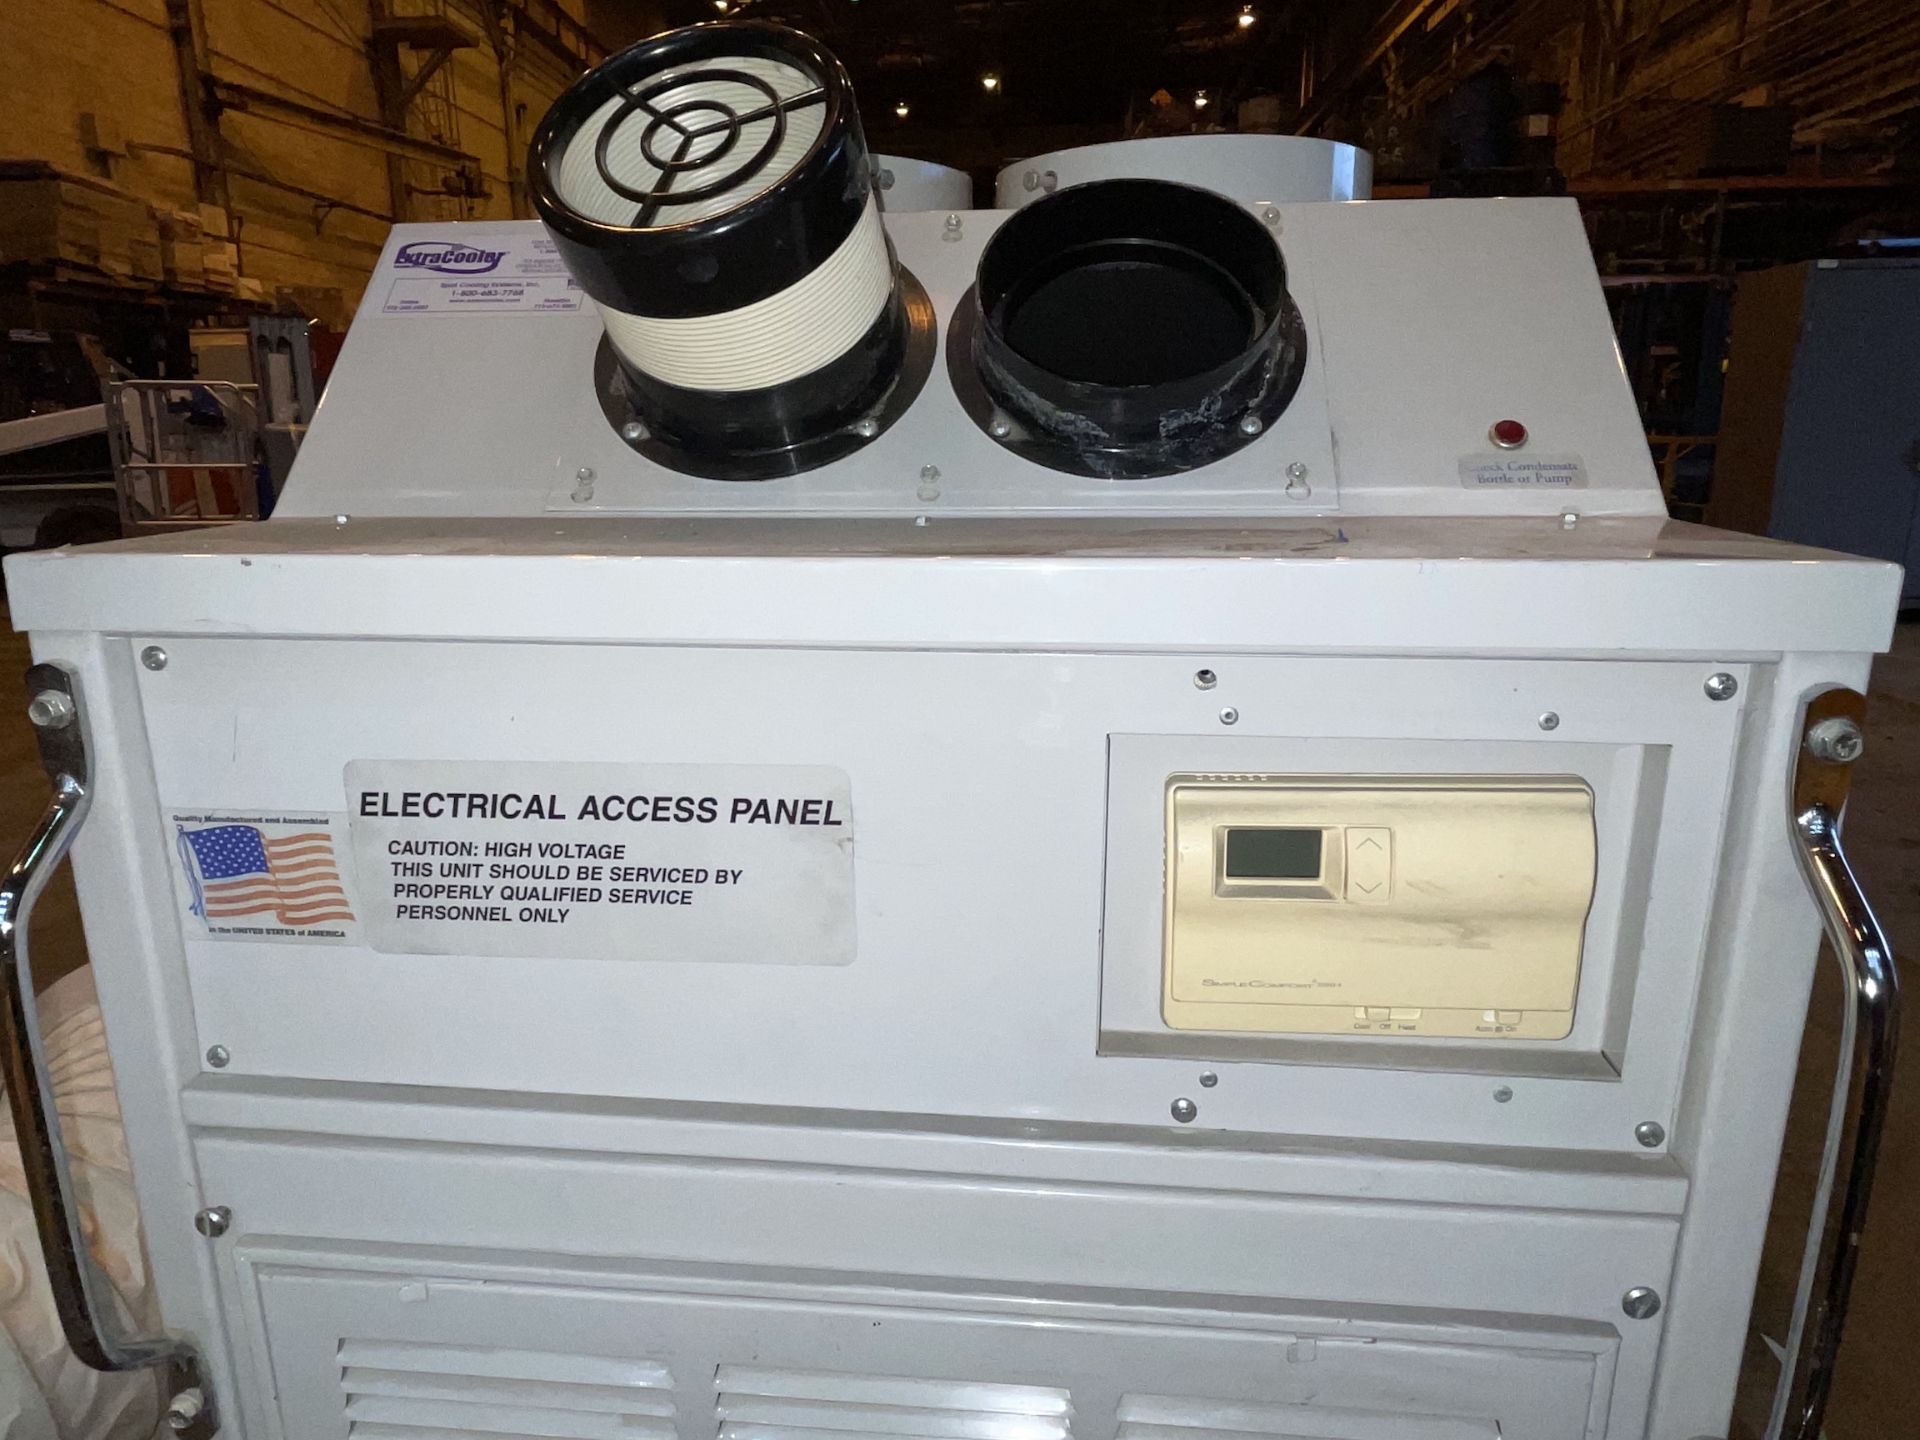 Extracooler Portable Air Condition System (BS38) - Lester, PA - Image 6 of 13